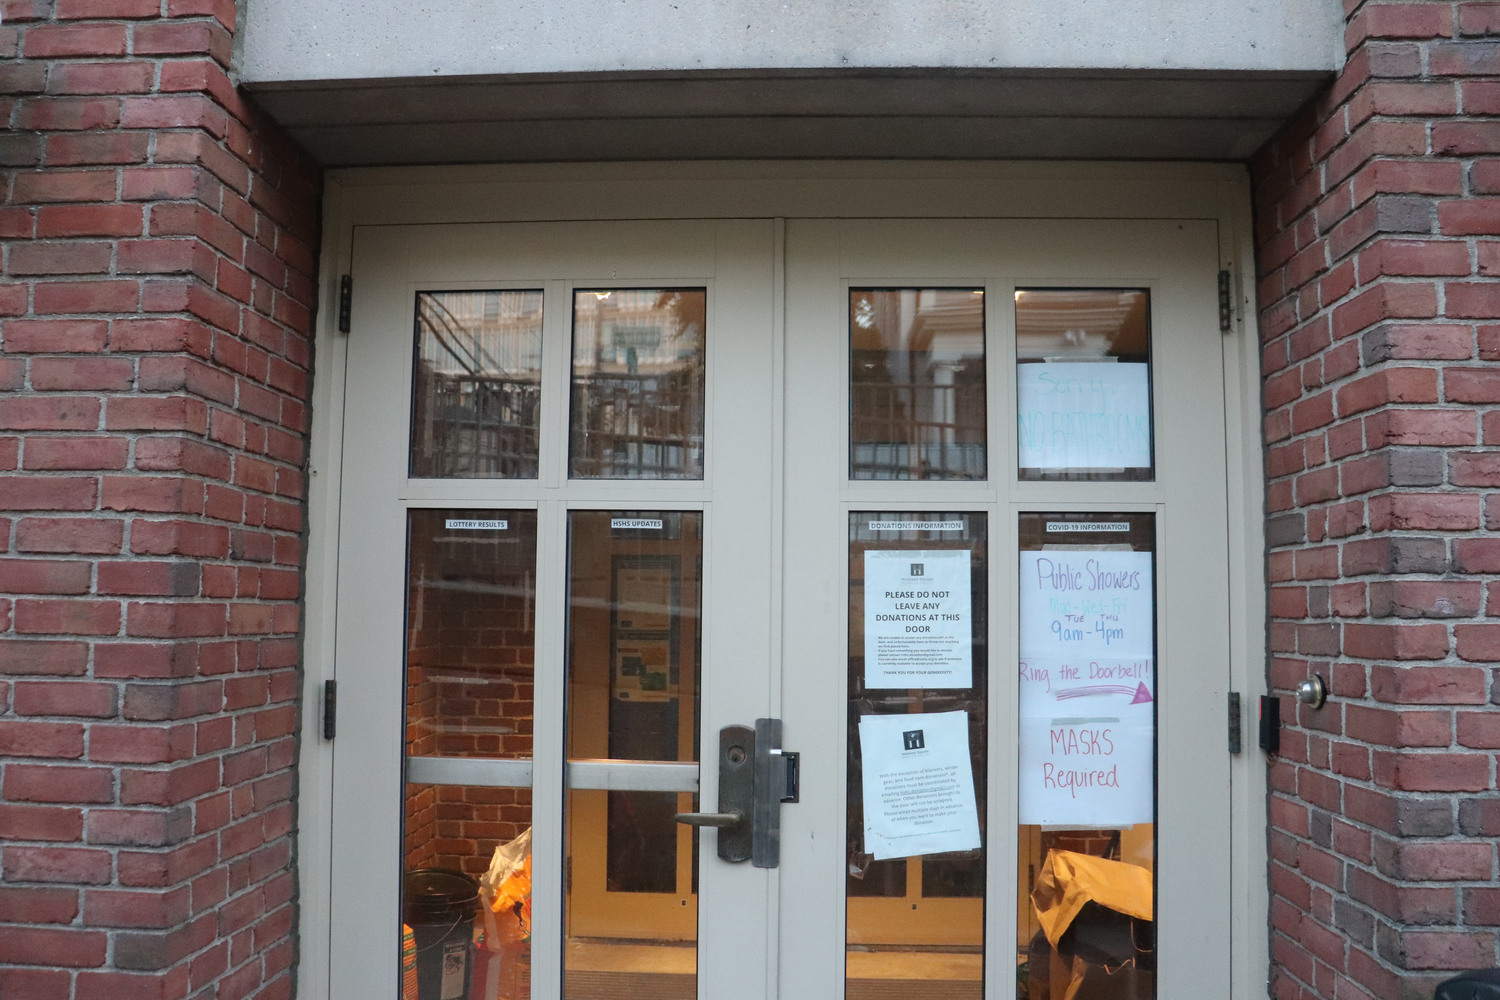 Harvard Square Homeless Shelter, established in 1993, operates out of the basement of University Lutheran Church on 66 Winthrop St.